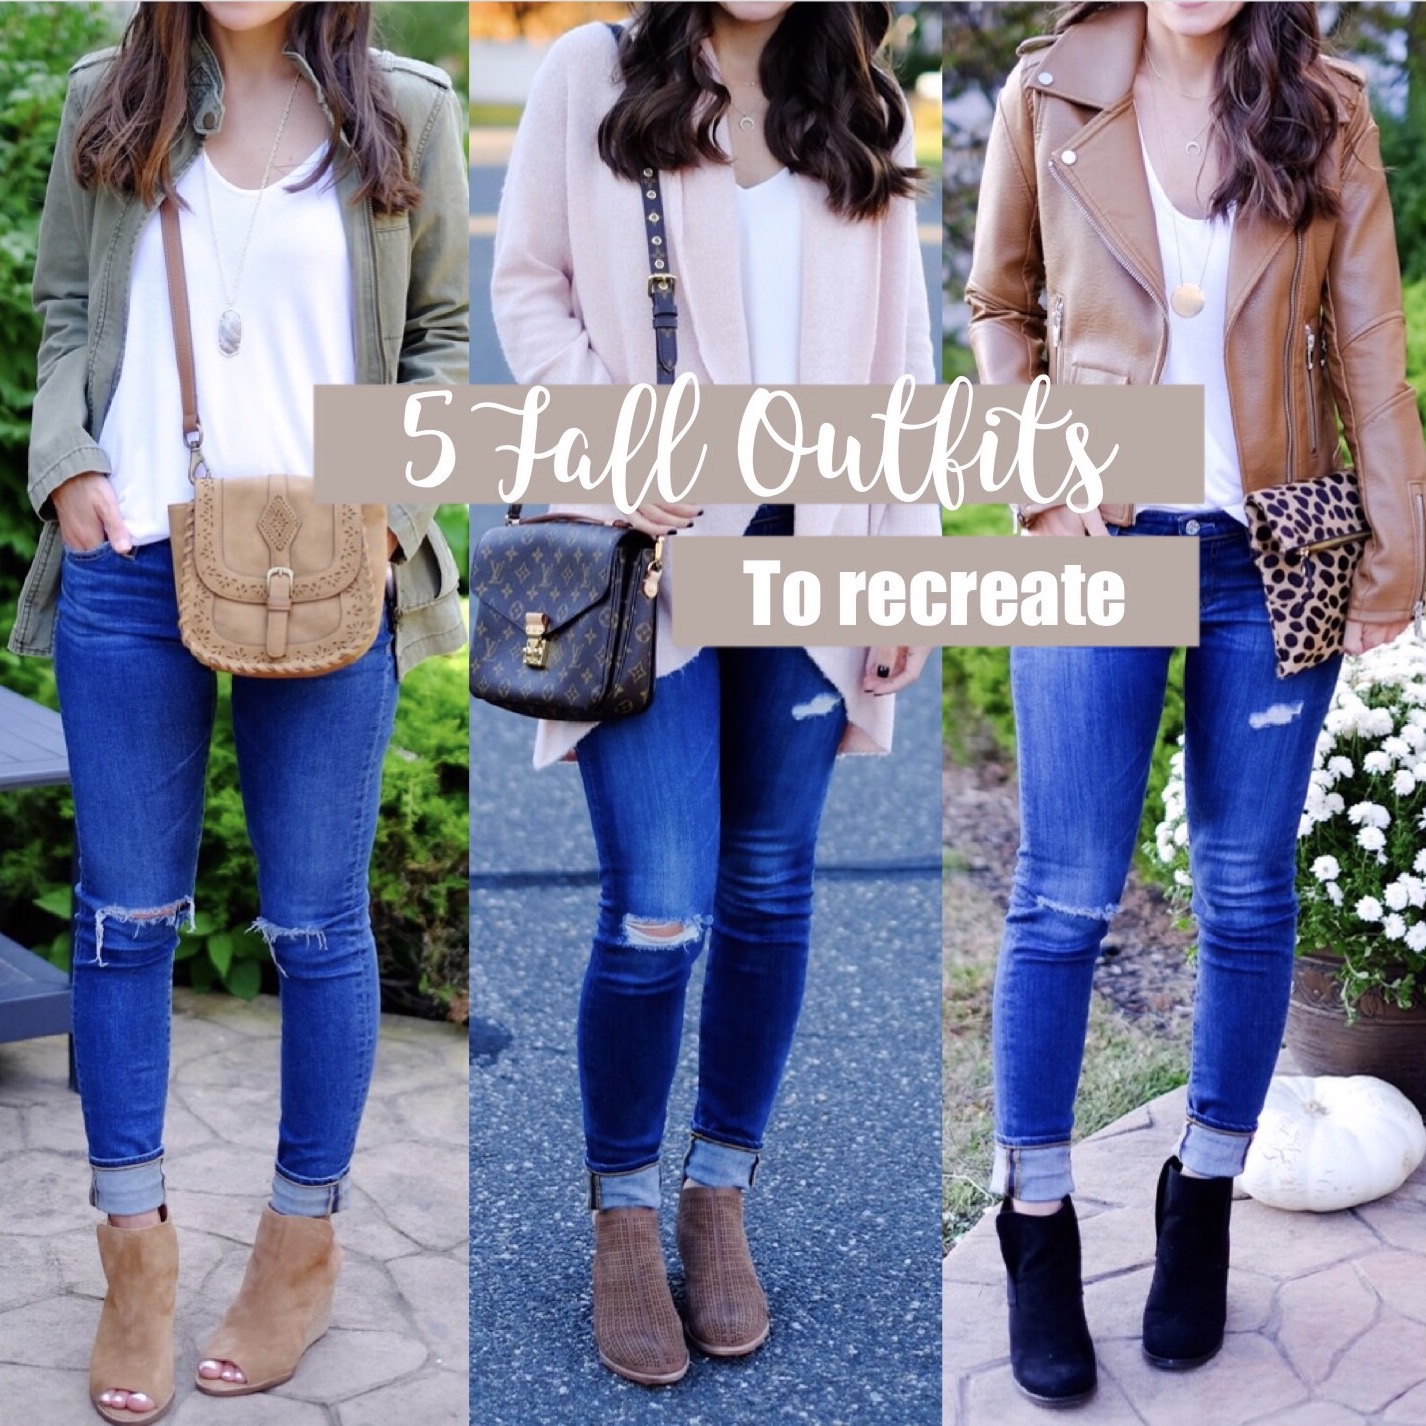 Friday Favorite outfits